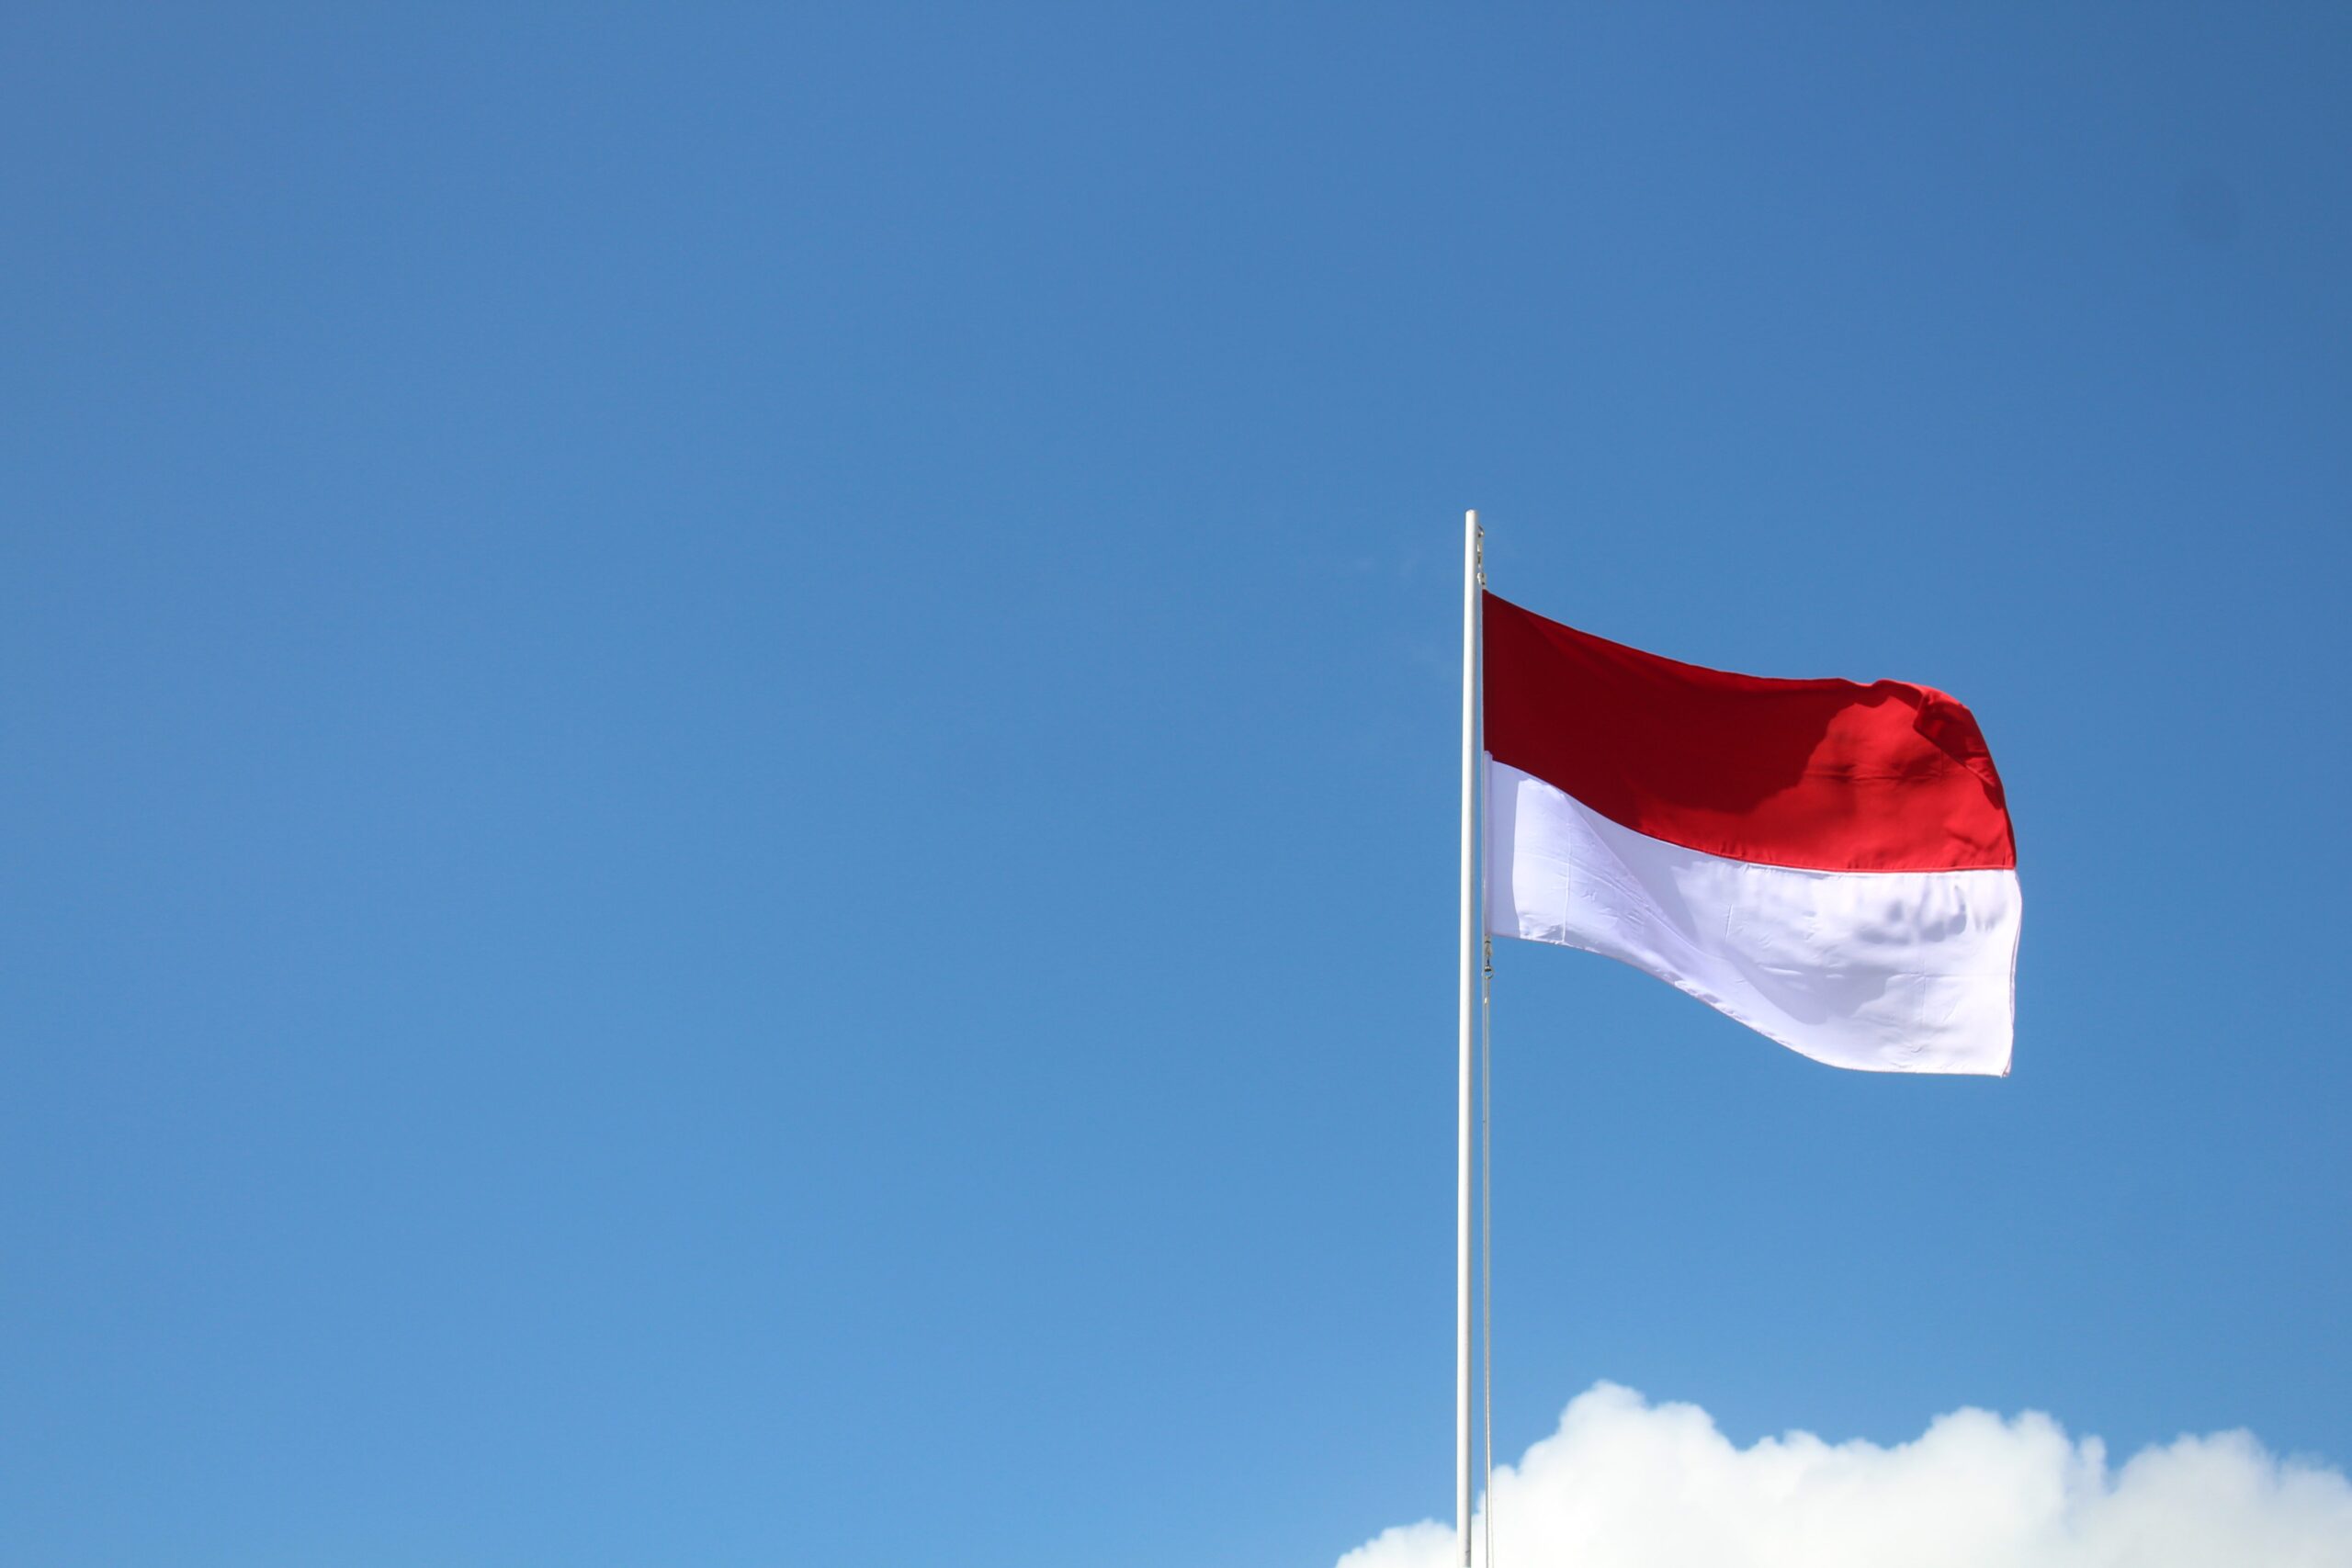 Indonesian flag blowing in clear skies